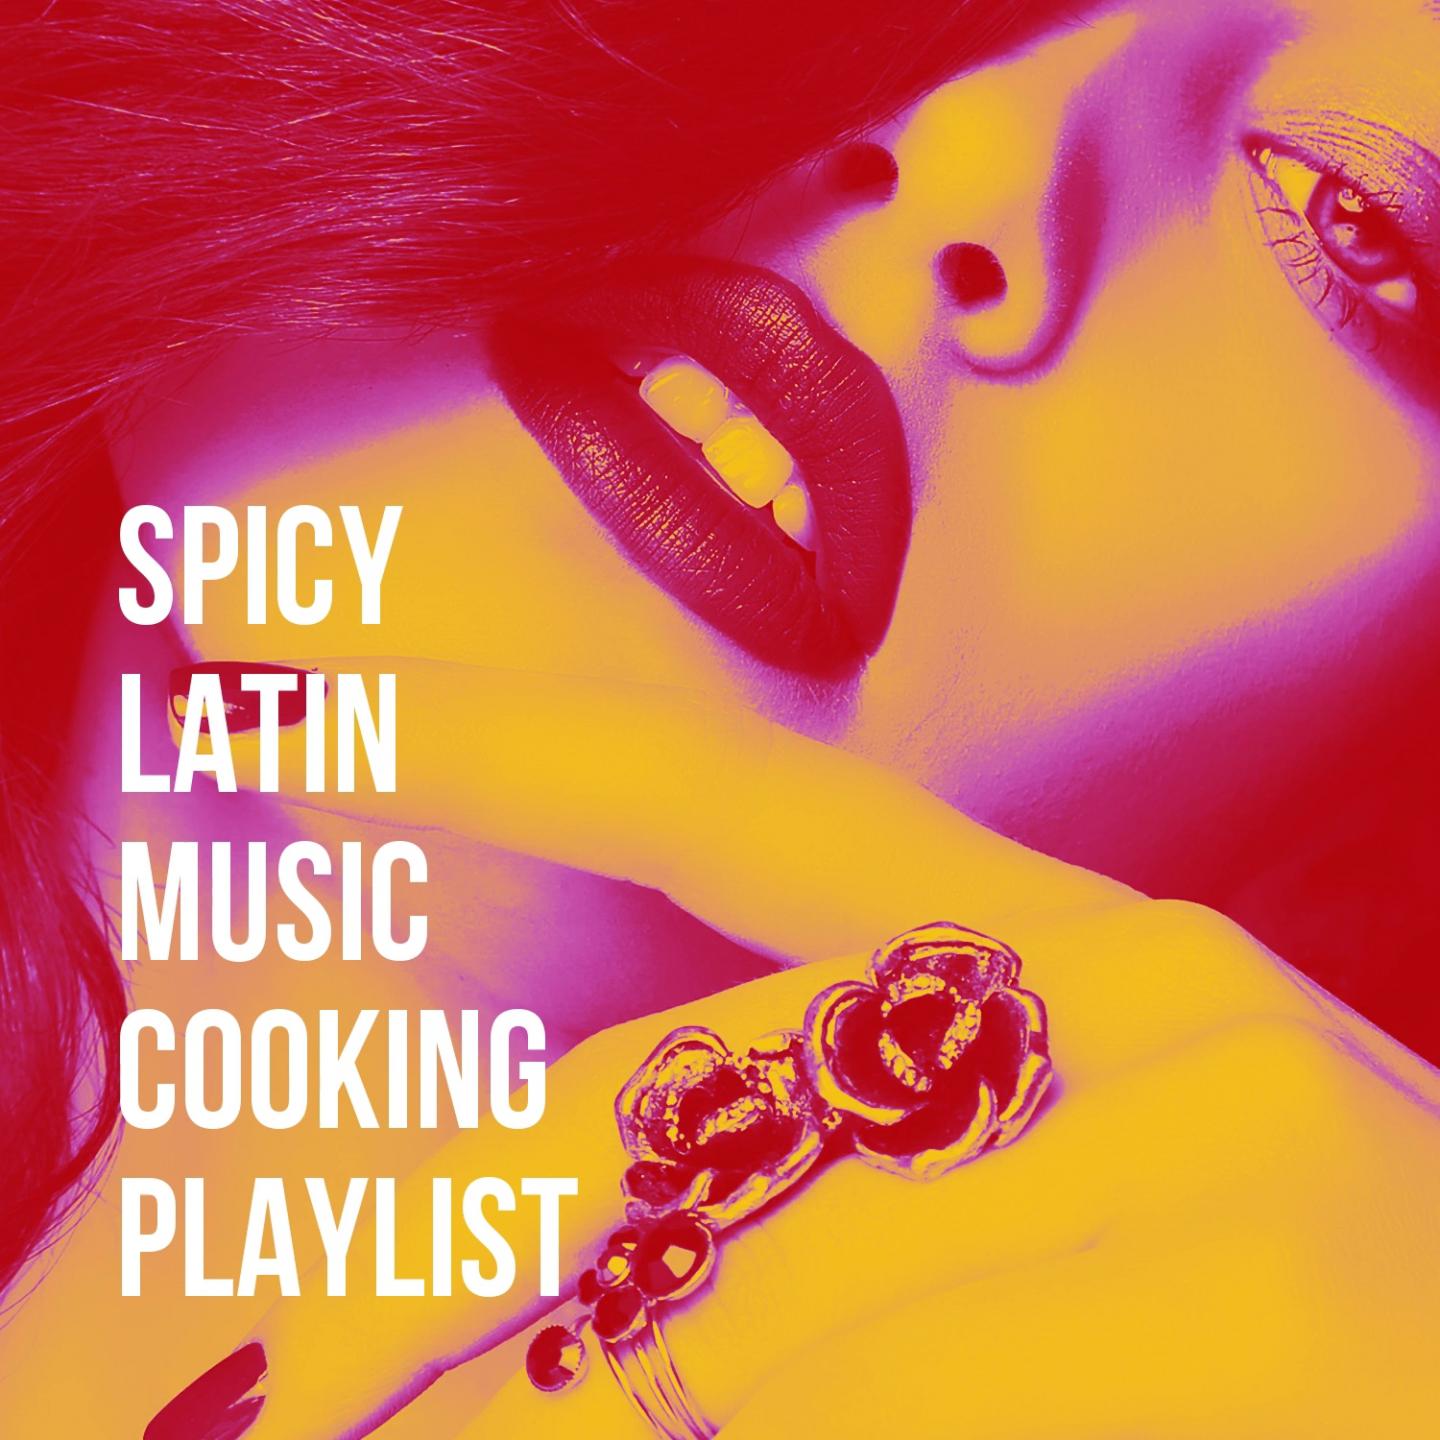 Spicy Latin Music Cooking Playlist